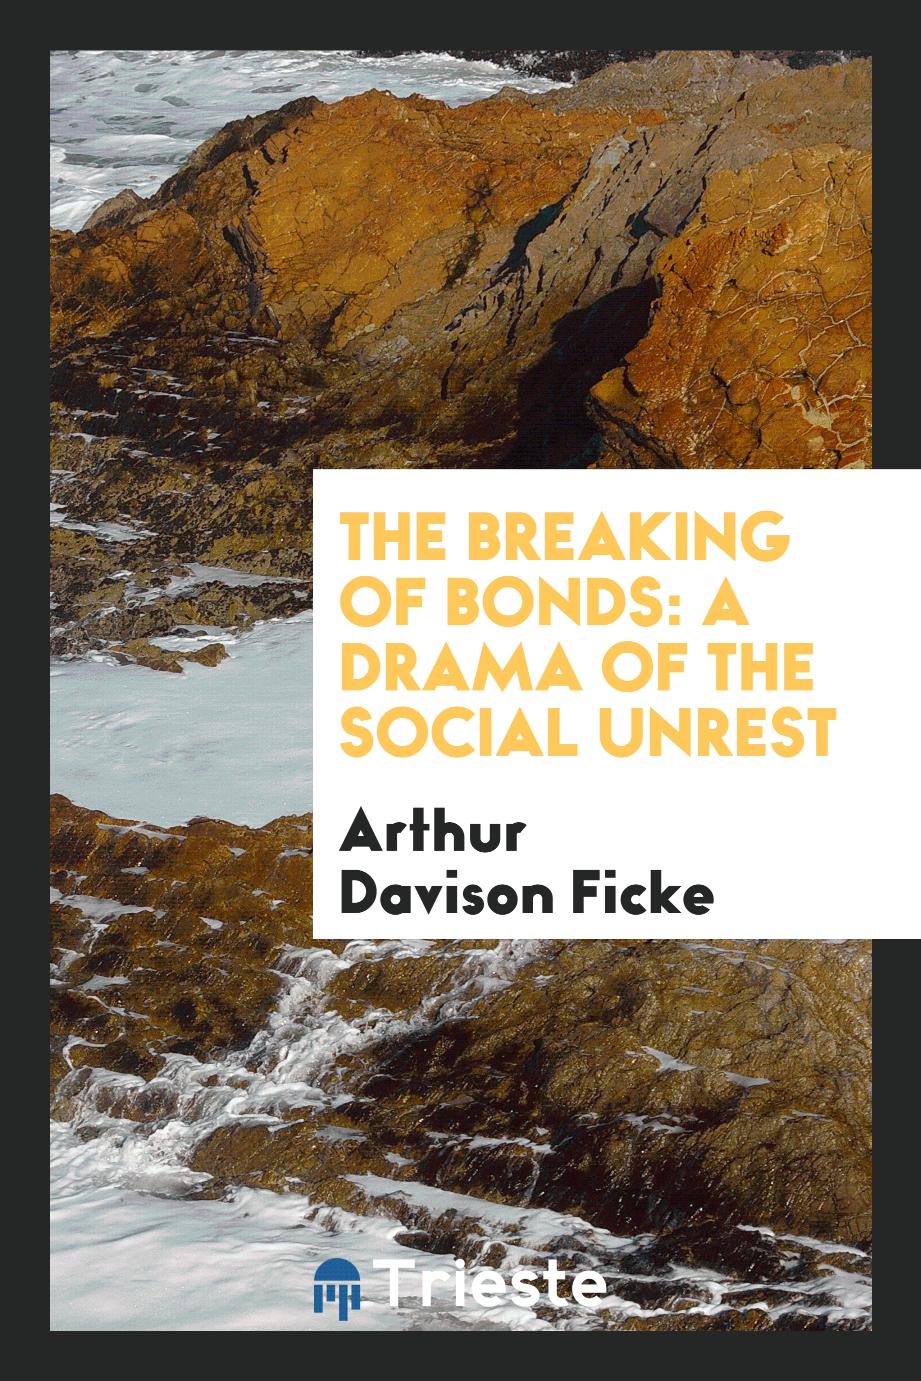 The Breaking of Bonds: A Drama of the Social Unrest